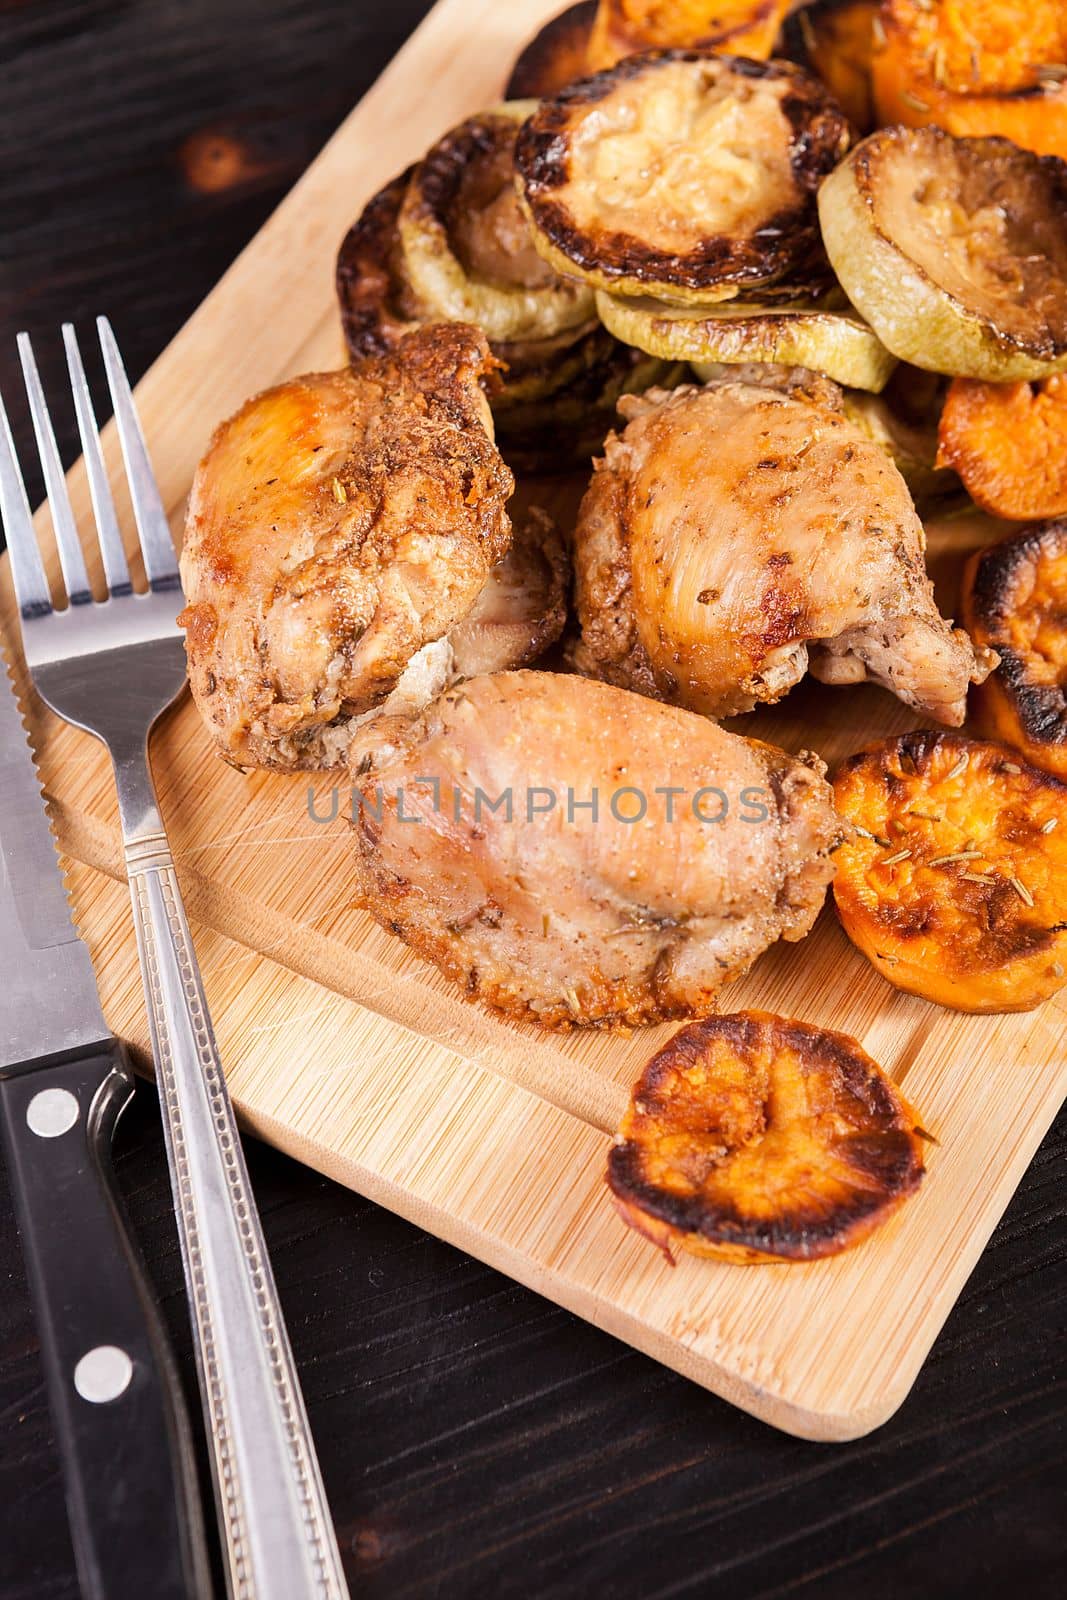 Wooden plate with fried chicken and grilled vegetables